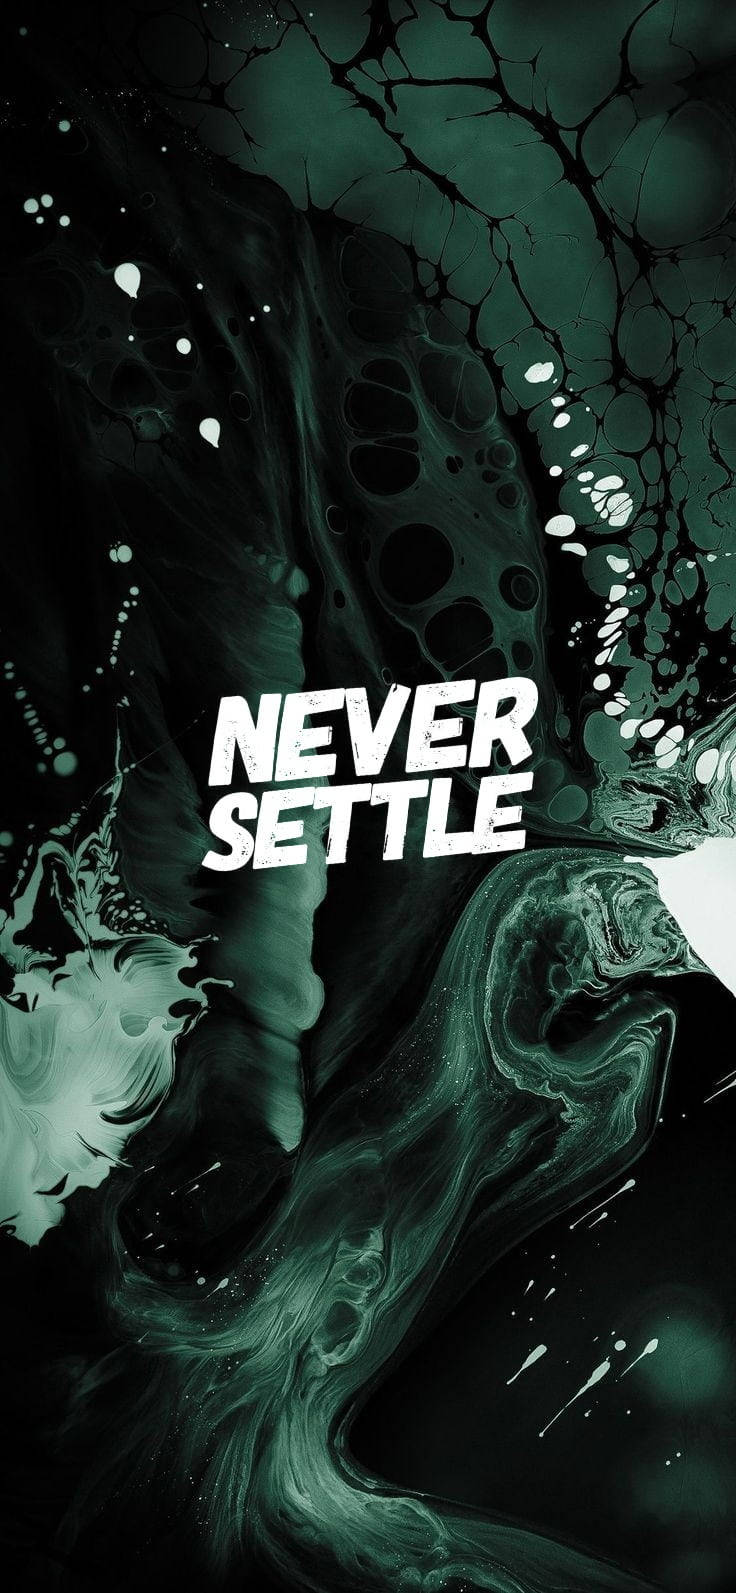 Emanating Energy With Never Settle Wallpaper